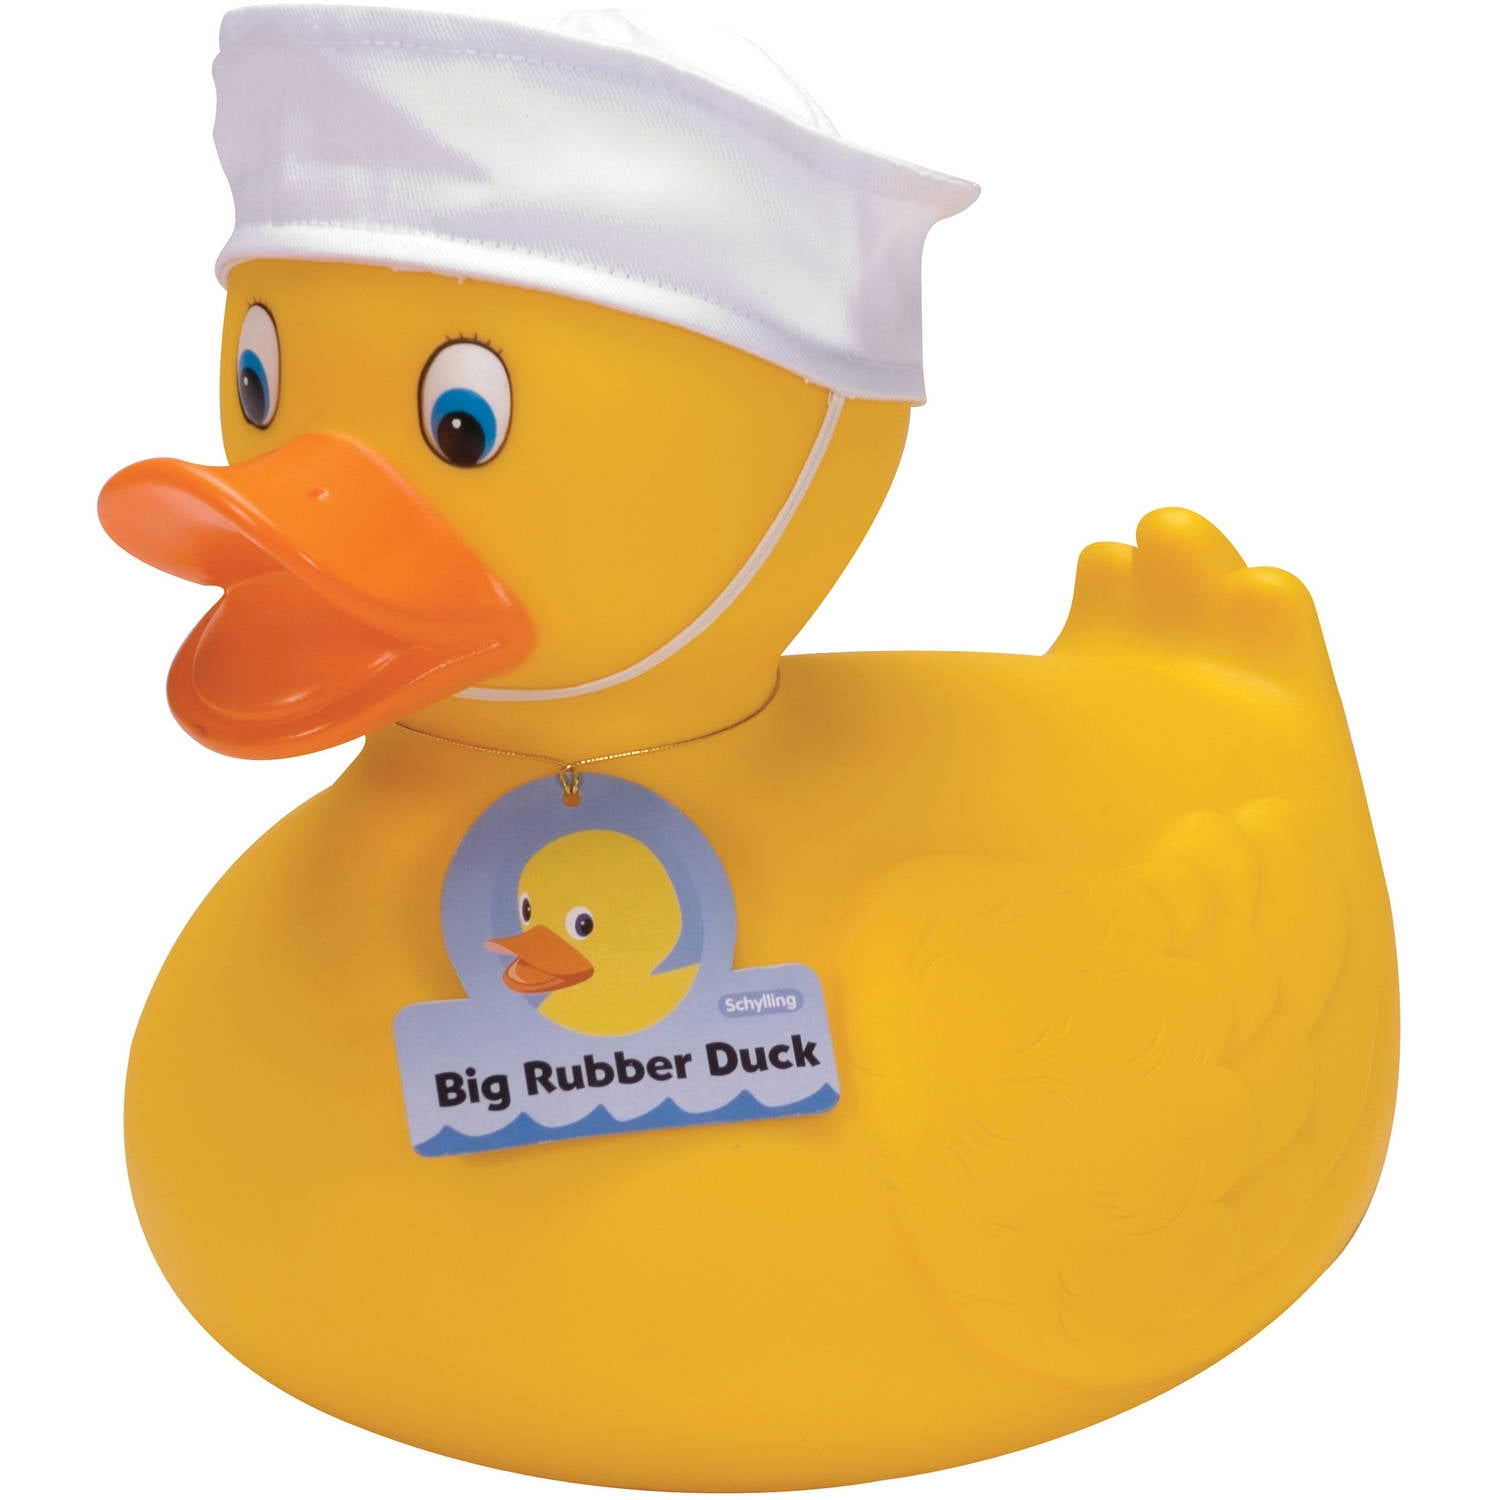 Ducks in the Window  Over 1000 styles of Rubber Ducks to match most any  personality, occupation, or favorite pastime!